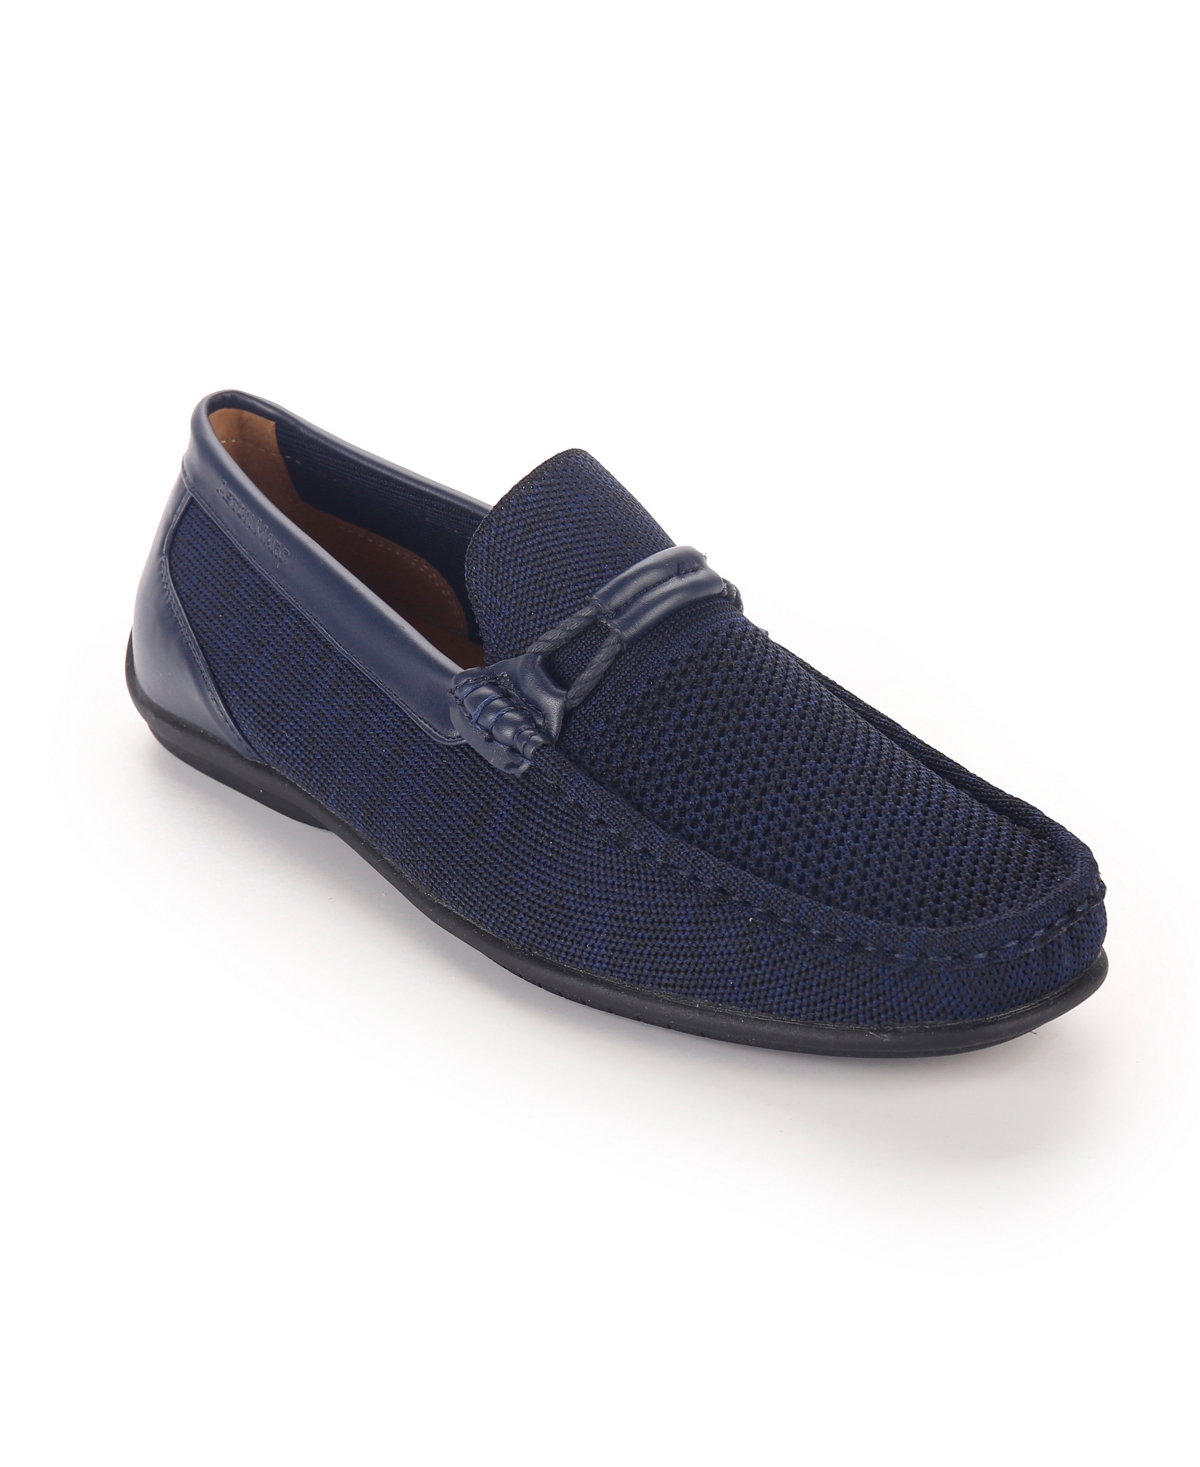 Men's Knit Lace-Strap Driving Loafer - Navy